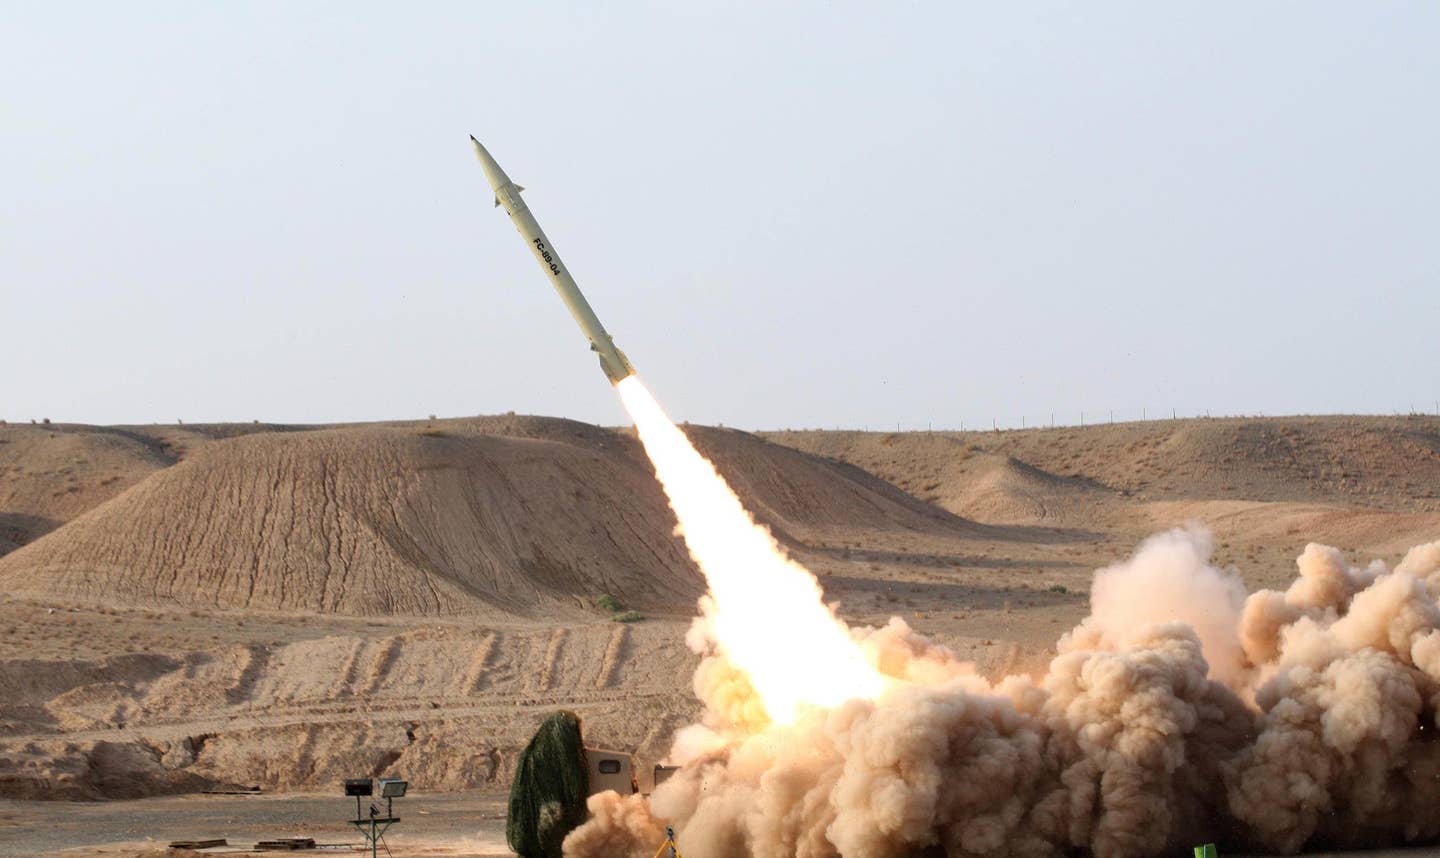 Iranian officials have acknowledged agreeing to sell Fateh 110 short-range ballistic missiles to Russia. (Photo by Mohsen Shandiz/Corbis via Getty Images)